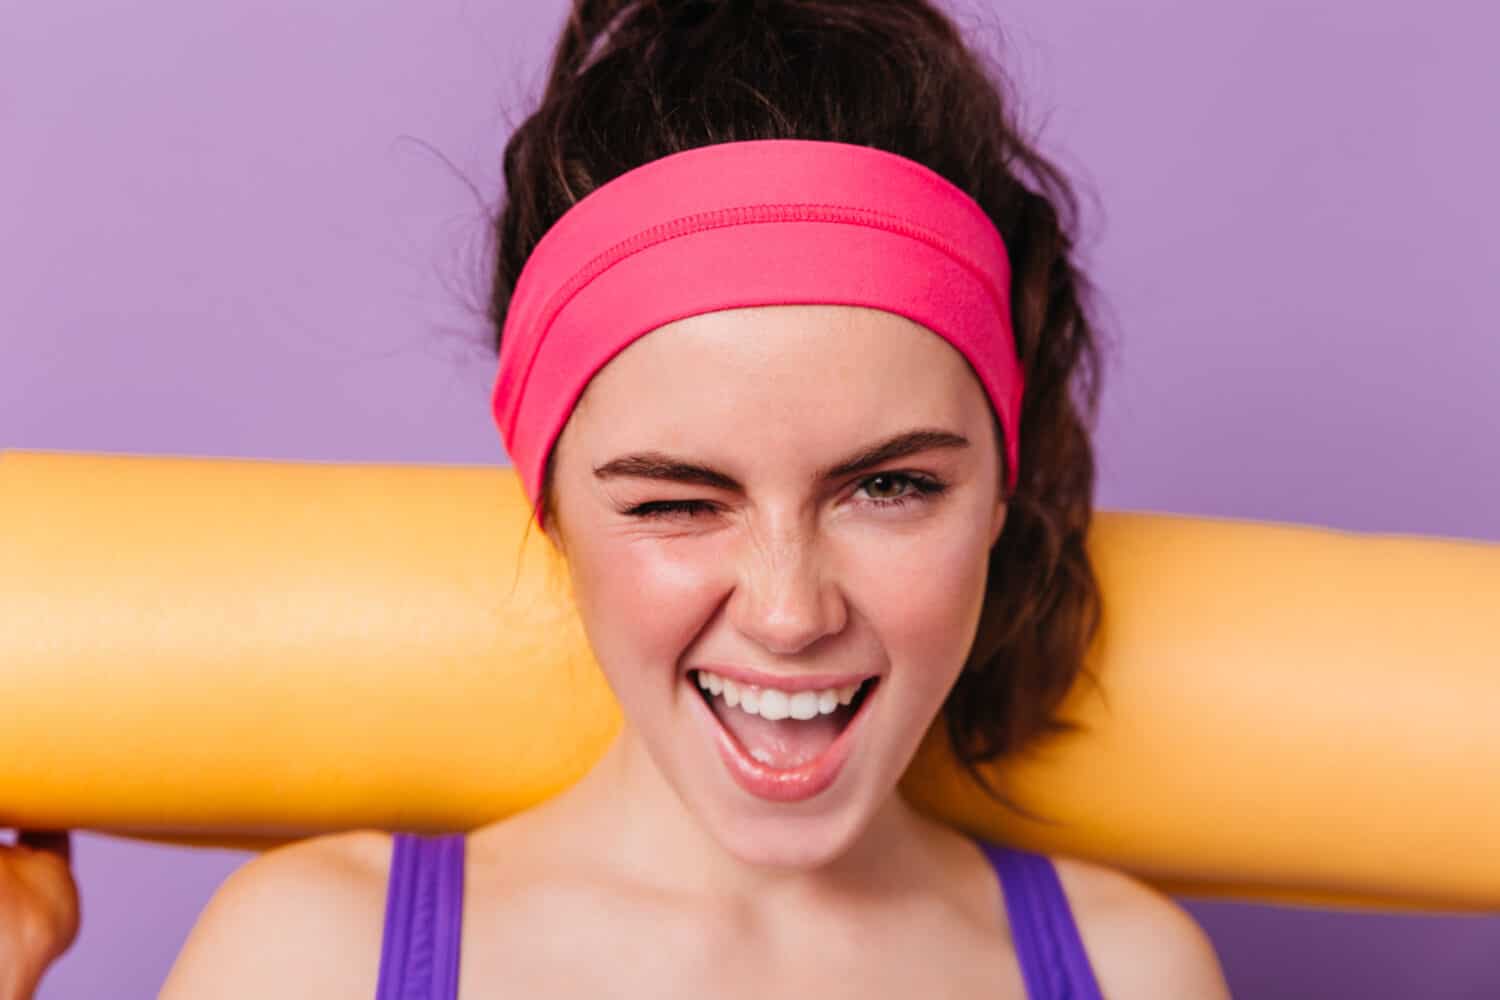 Positive girl athlete in pink headband smiles and winks on purple background with orange mat for fitness